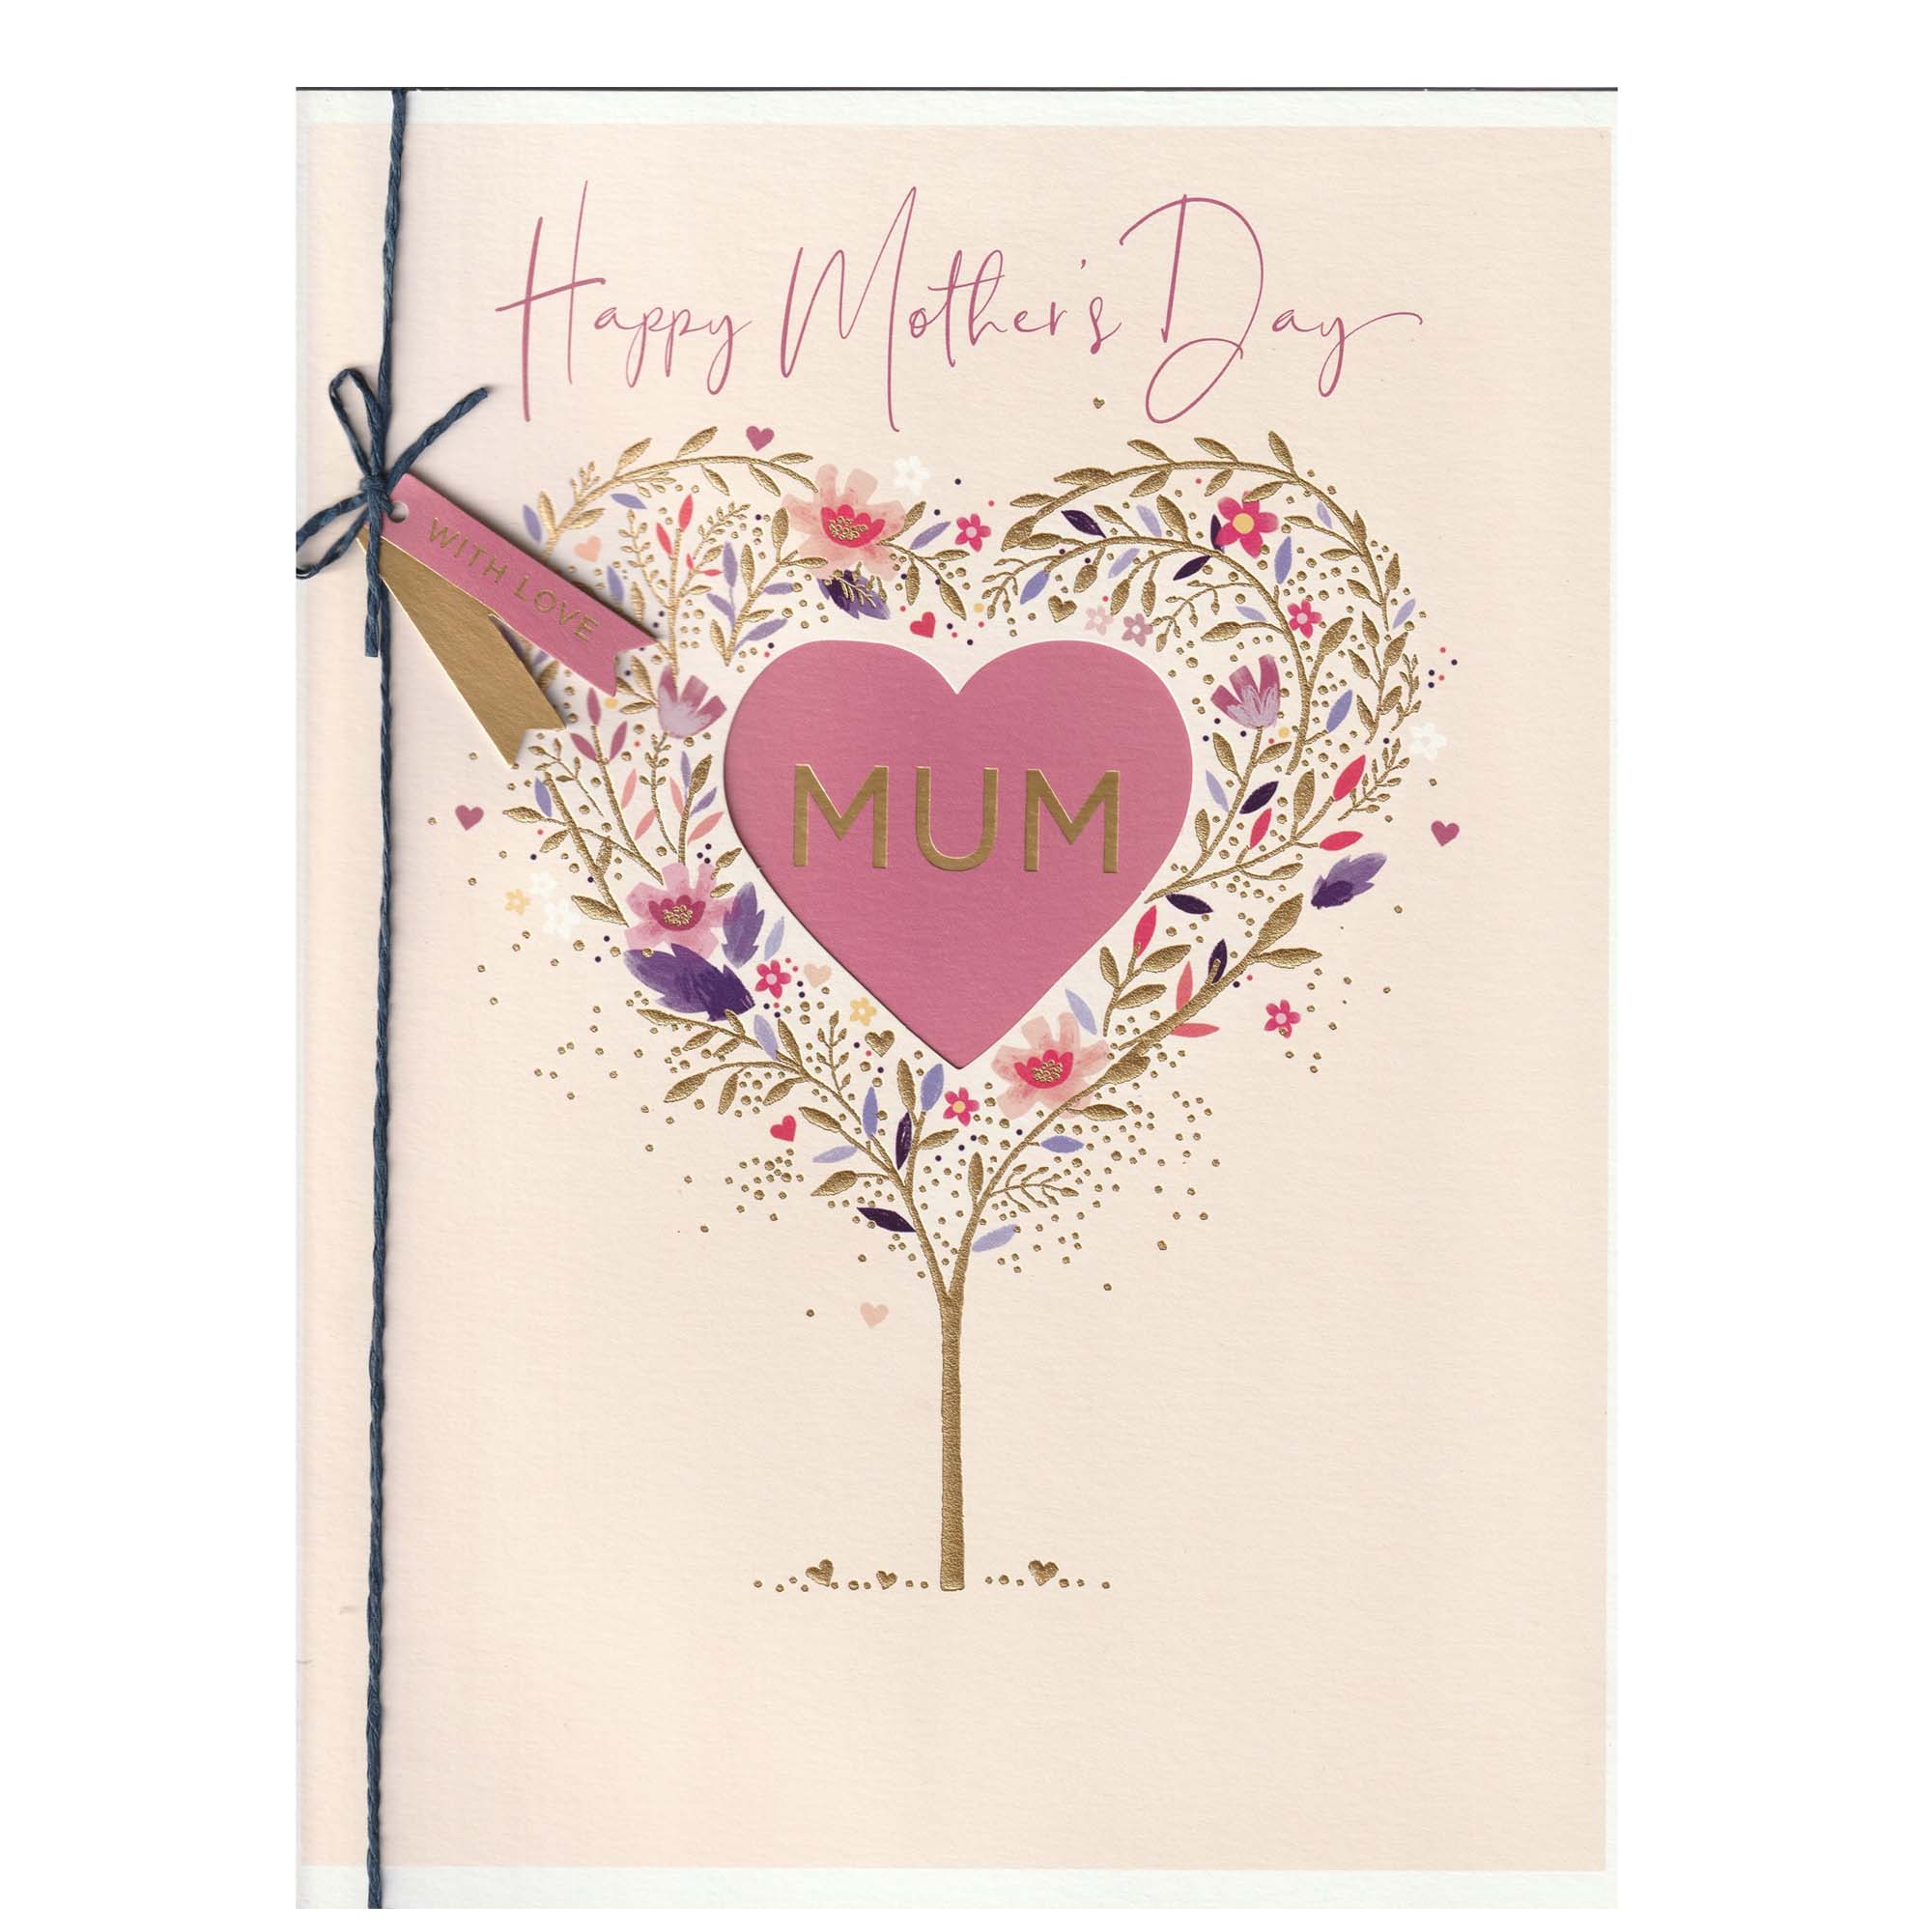 Happy Mothers Day Mum Floral Greeting Card